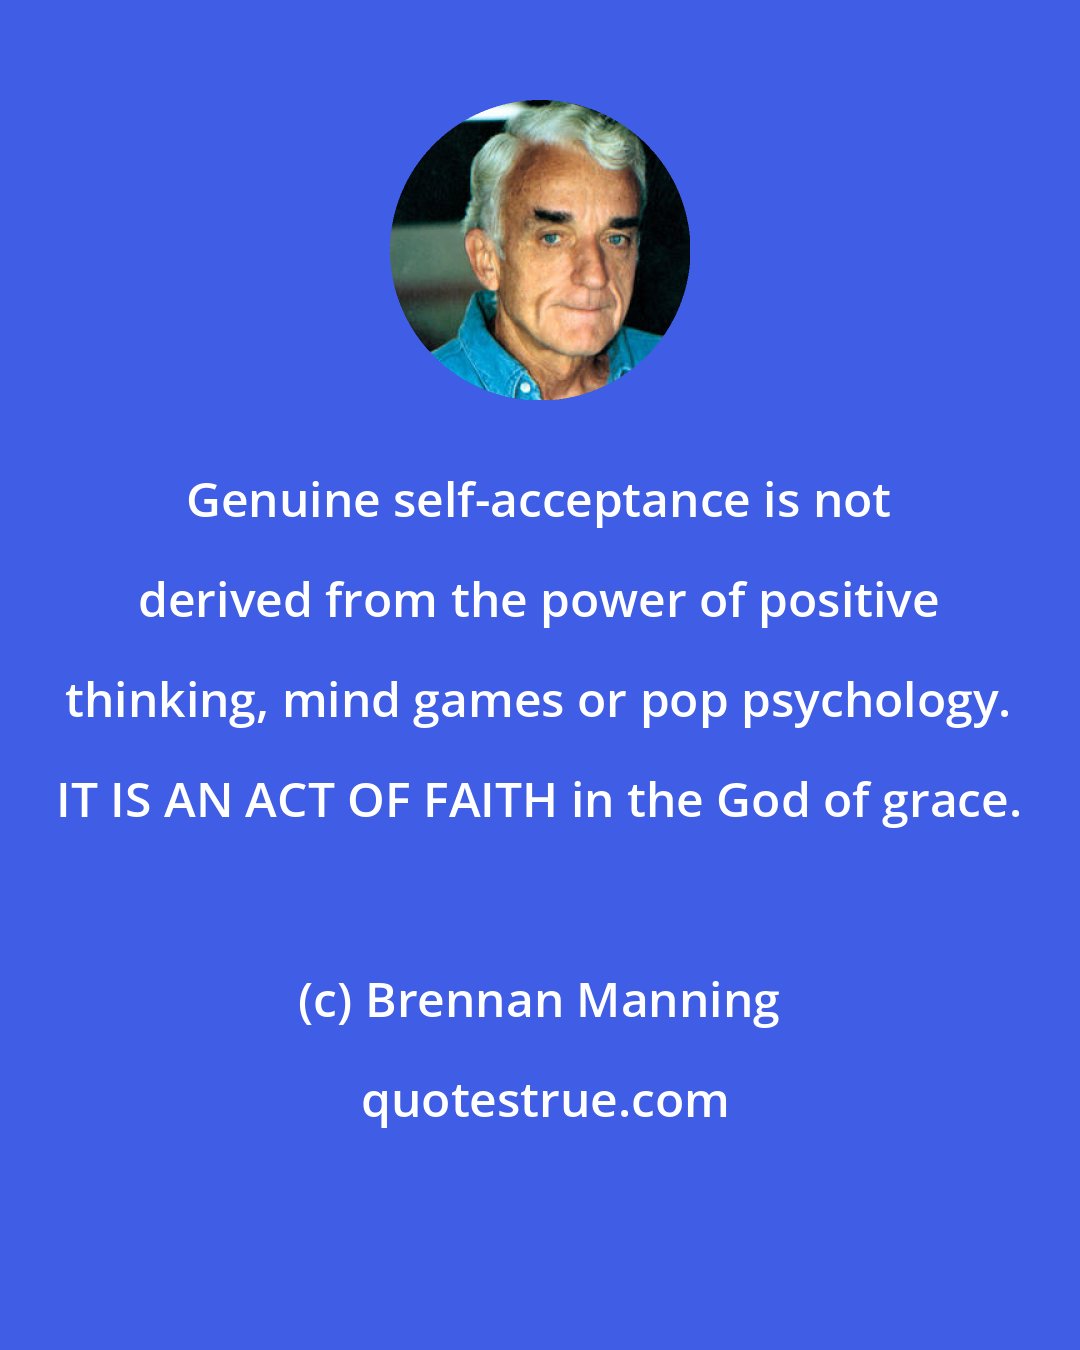 Brennan Manning: Genuine self-acceptance is not derived from the power of positive thinking, mind games or pop psychology. IT IS AN ACT OF FAITH in the God of grace.